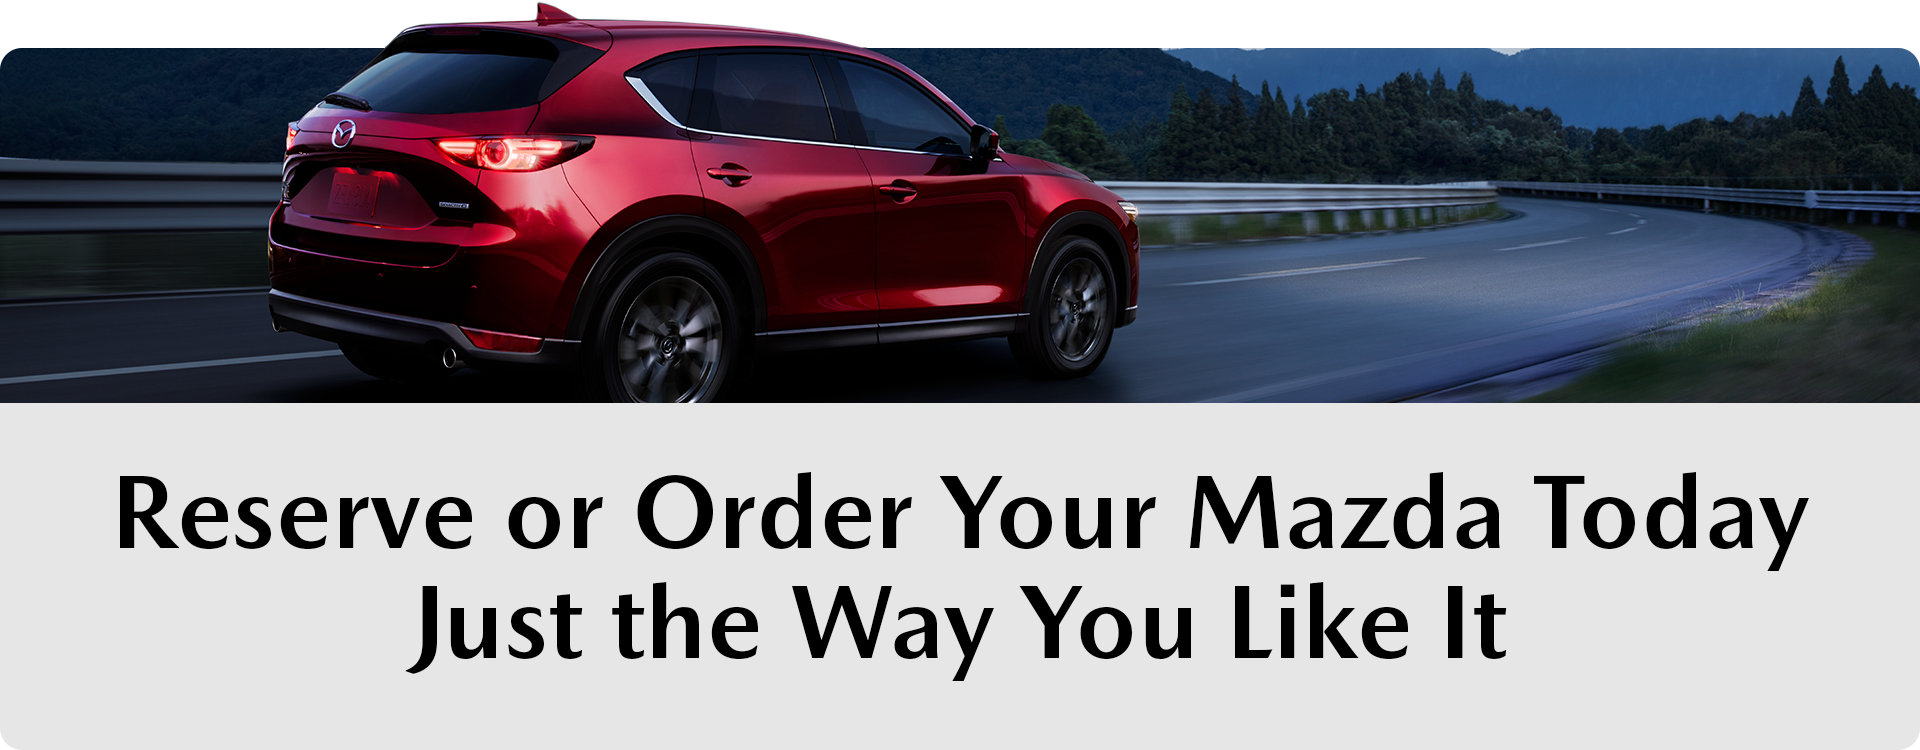 Reserve Your Mazda Today